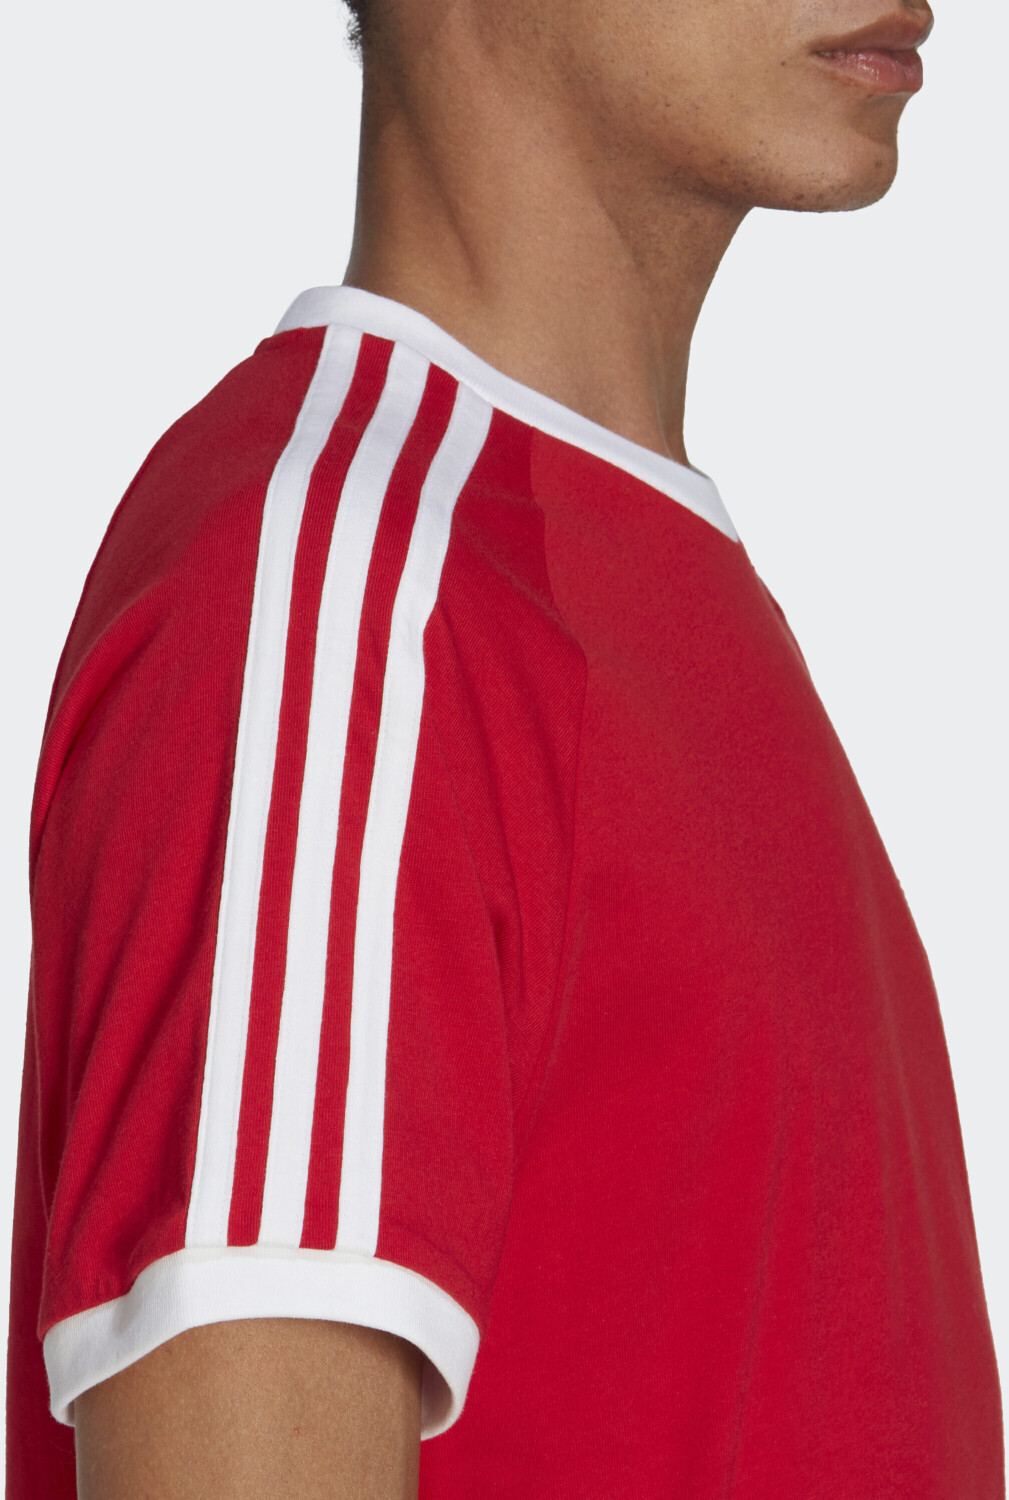 Buy Adidas Adicolor Classics Deals better (Today) £27.99 T-Shirt scarlet on Best – (IA4852) 3-Stripes from